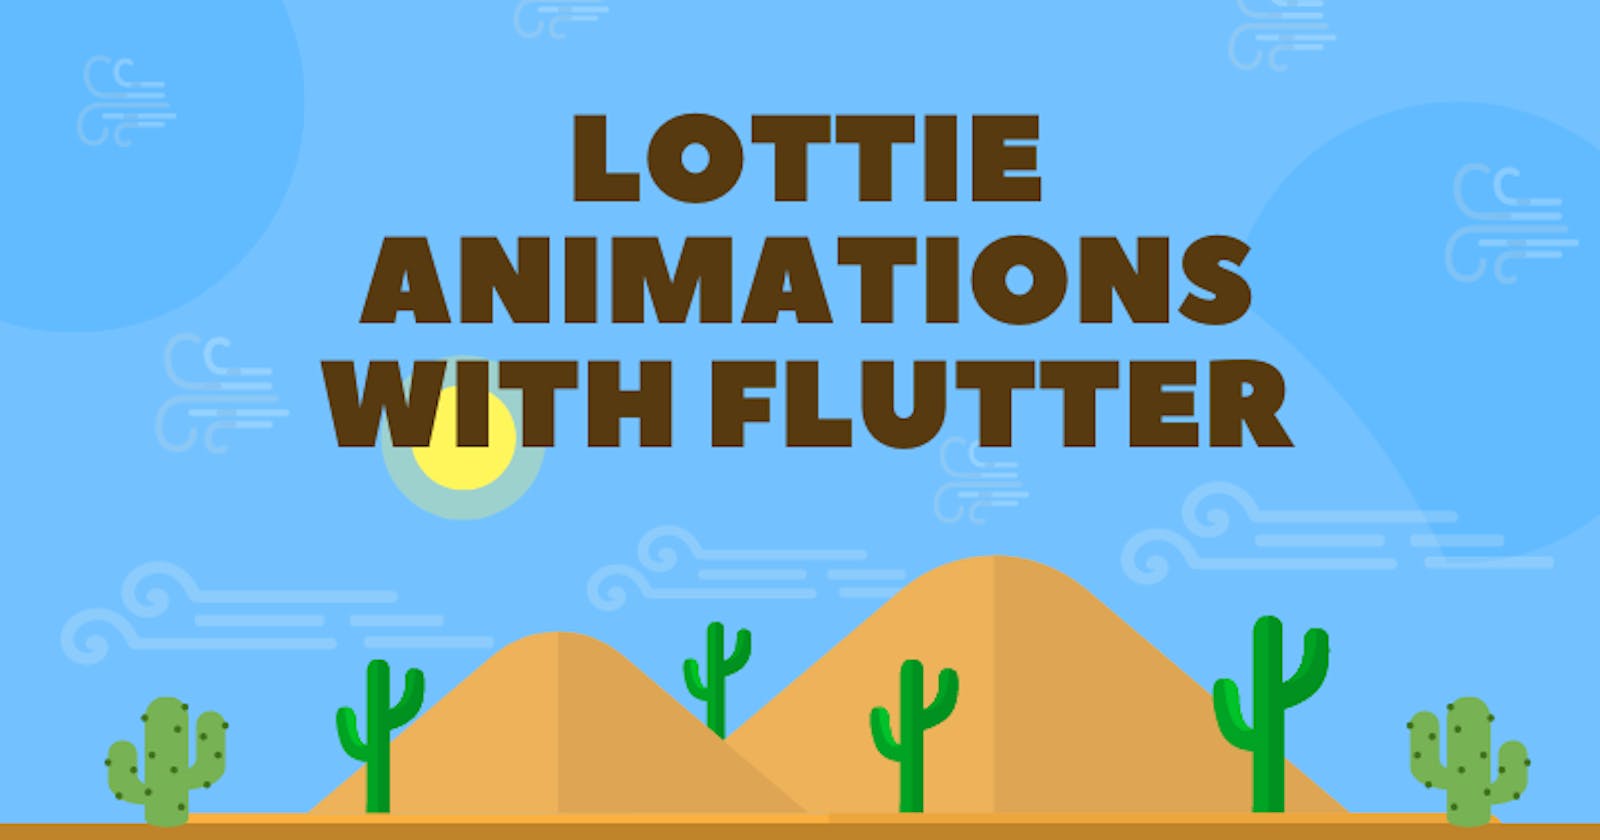 Lottie Animations with Flutter